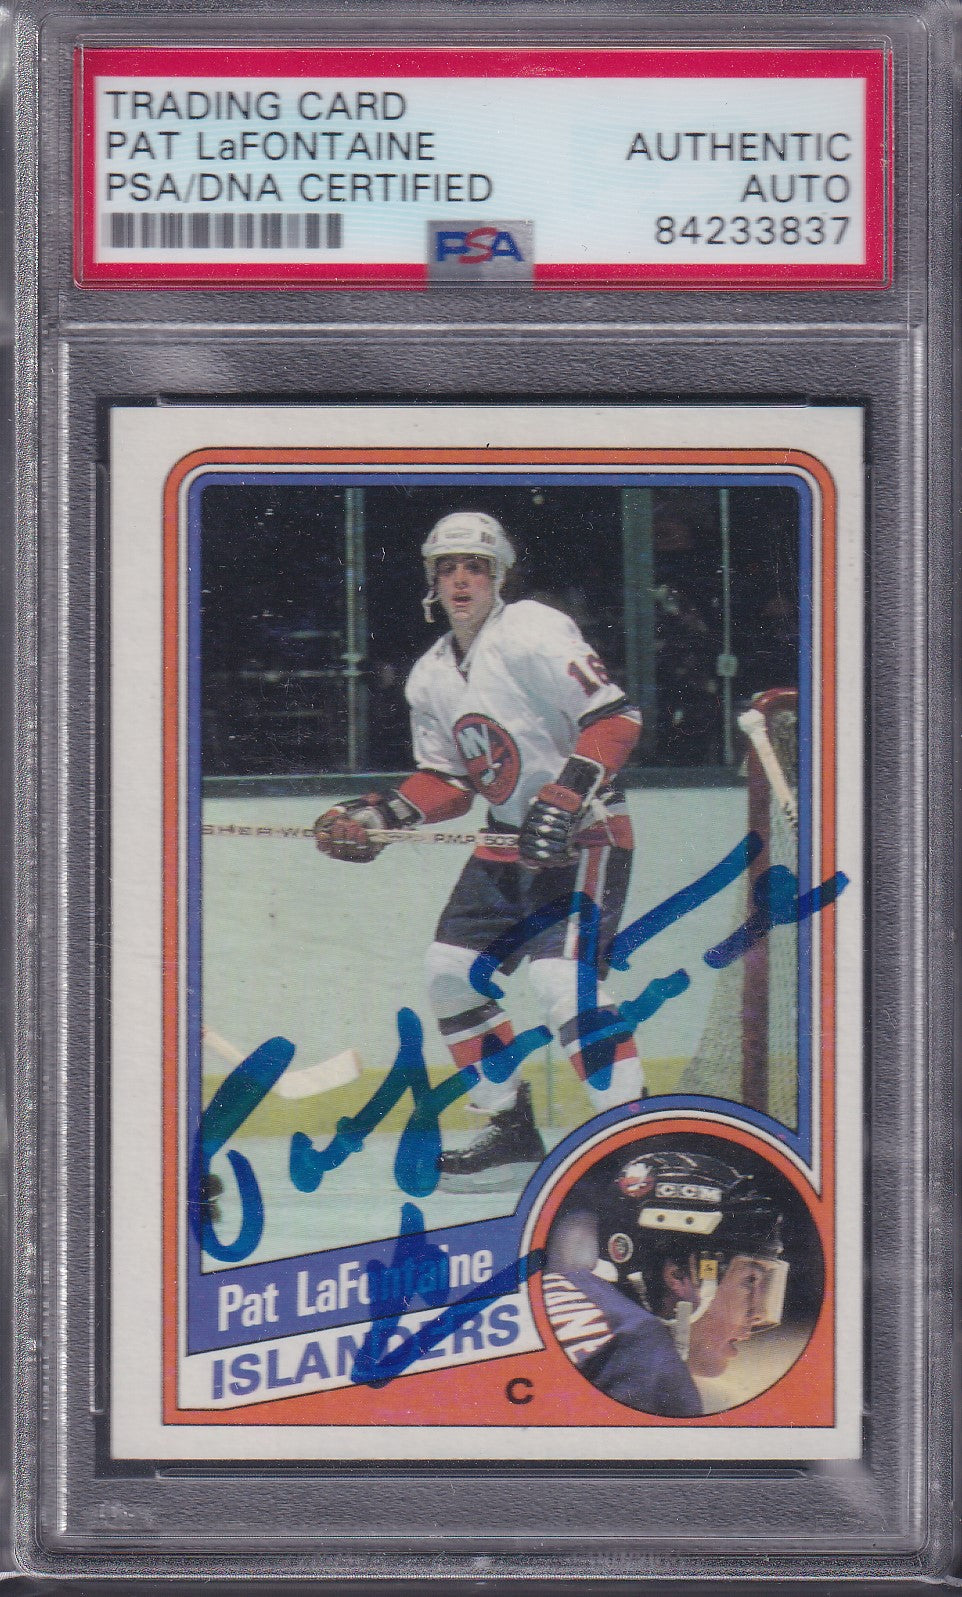 PAT LAFONTAINE - 1983 Topps Rookie AUTO, PSA/DNA Authentic